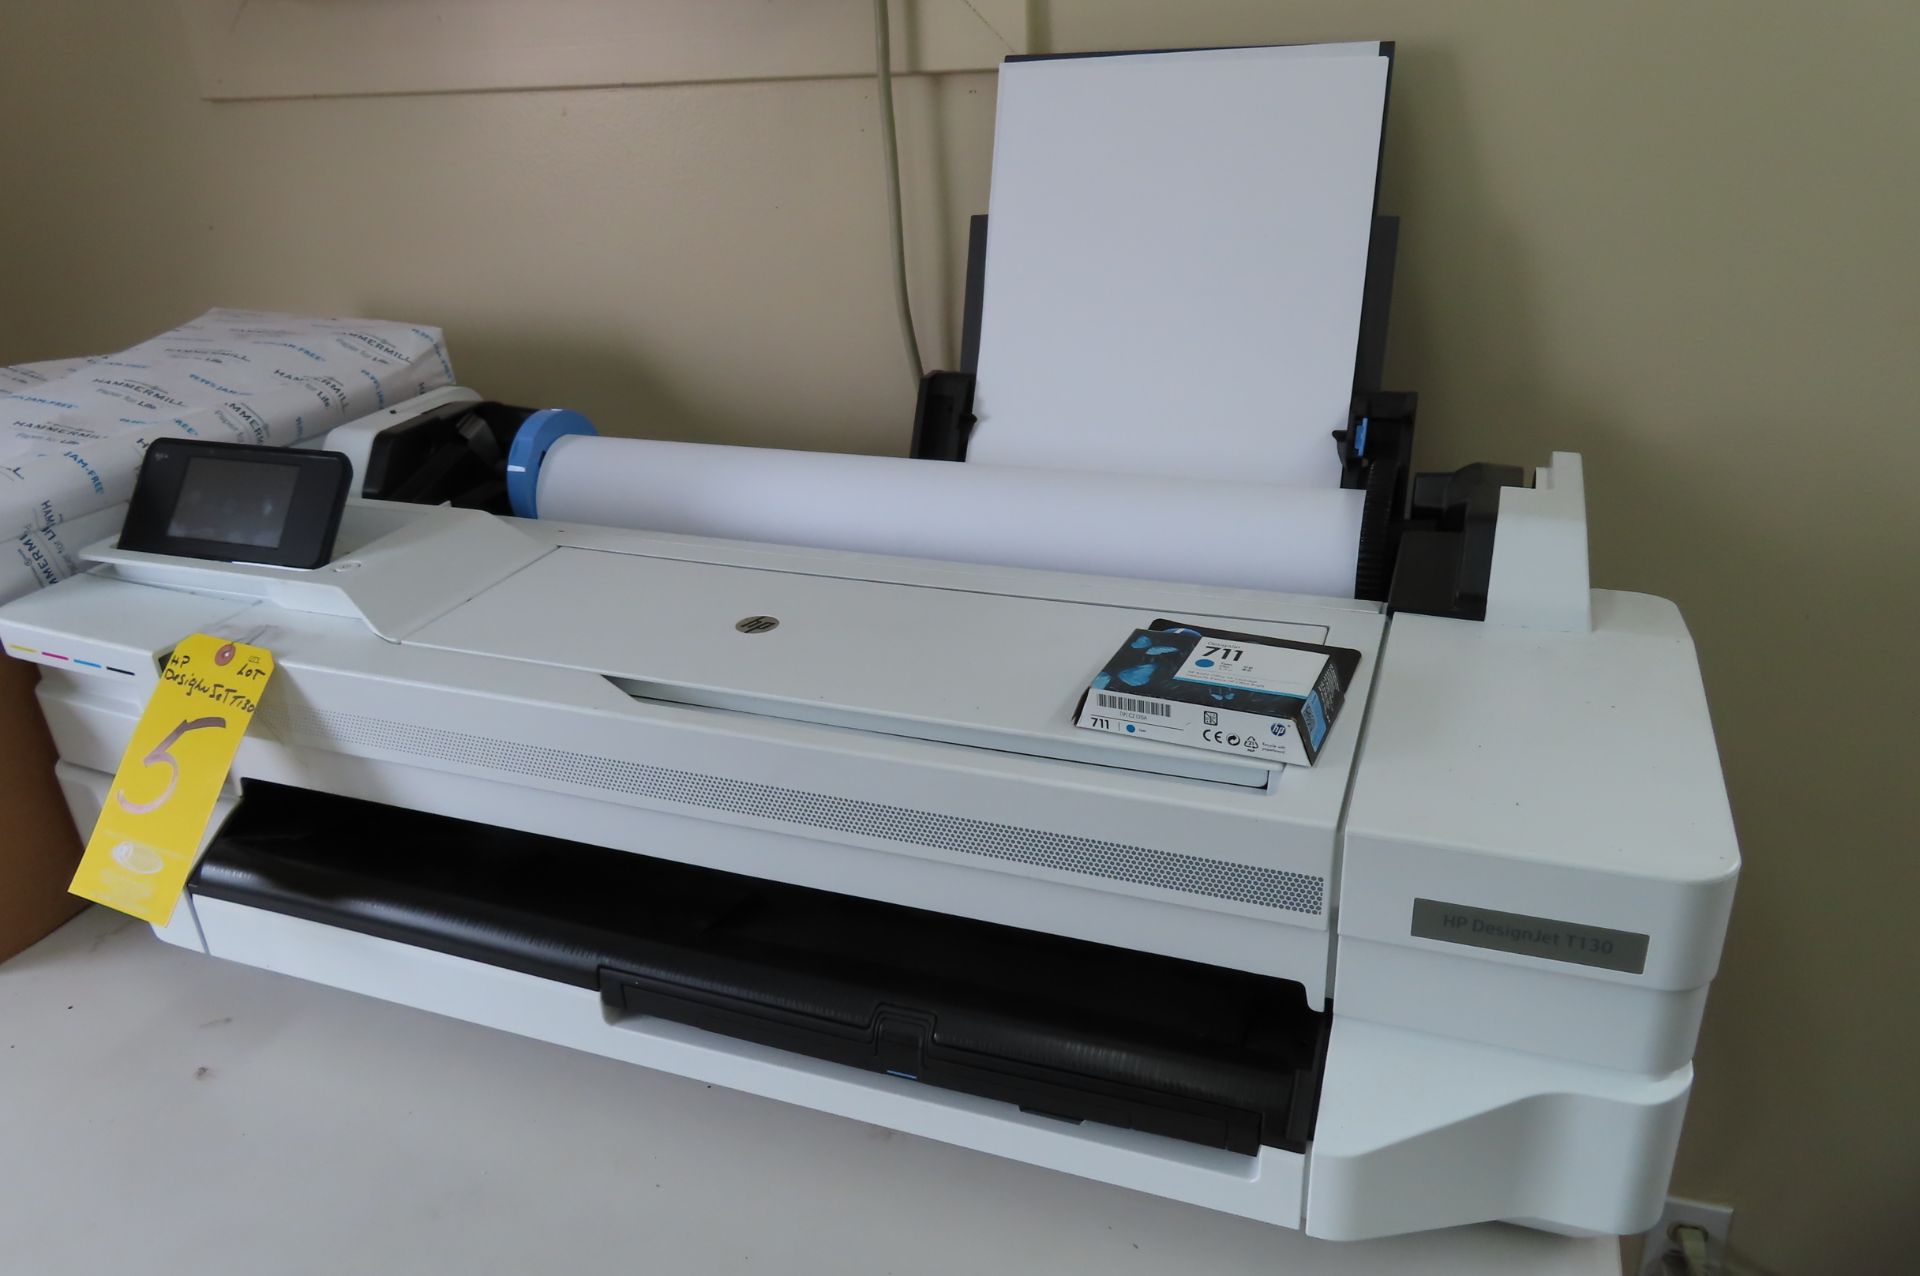 HP DESIGN JET T130 26 IN. WIDE-FORMAT PRINTER WITH PAPER ROLLS AND SHEET-FED CASSETTE, (3) ROLLS - Image 2 of 3